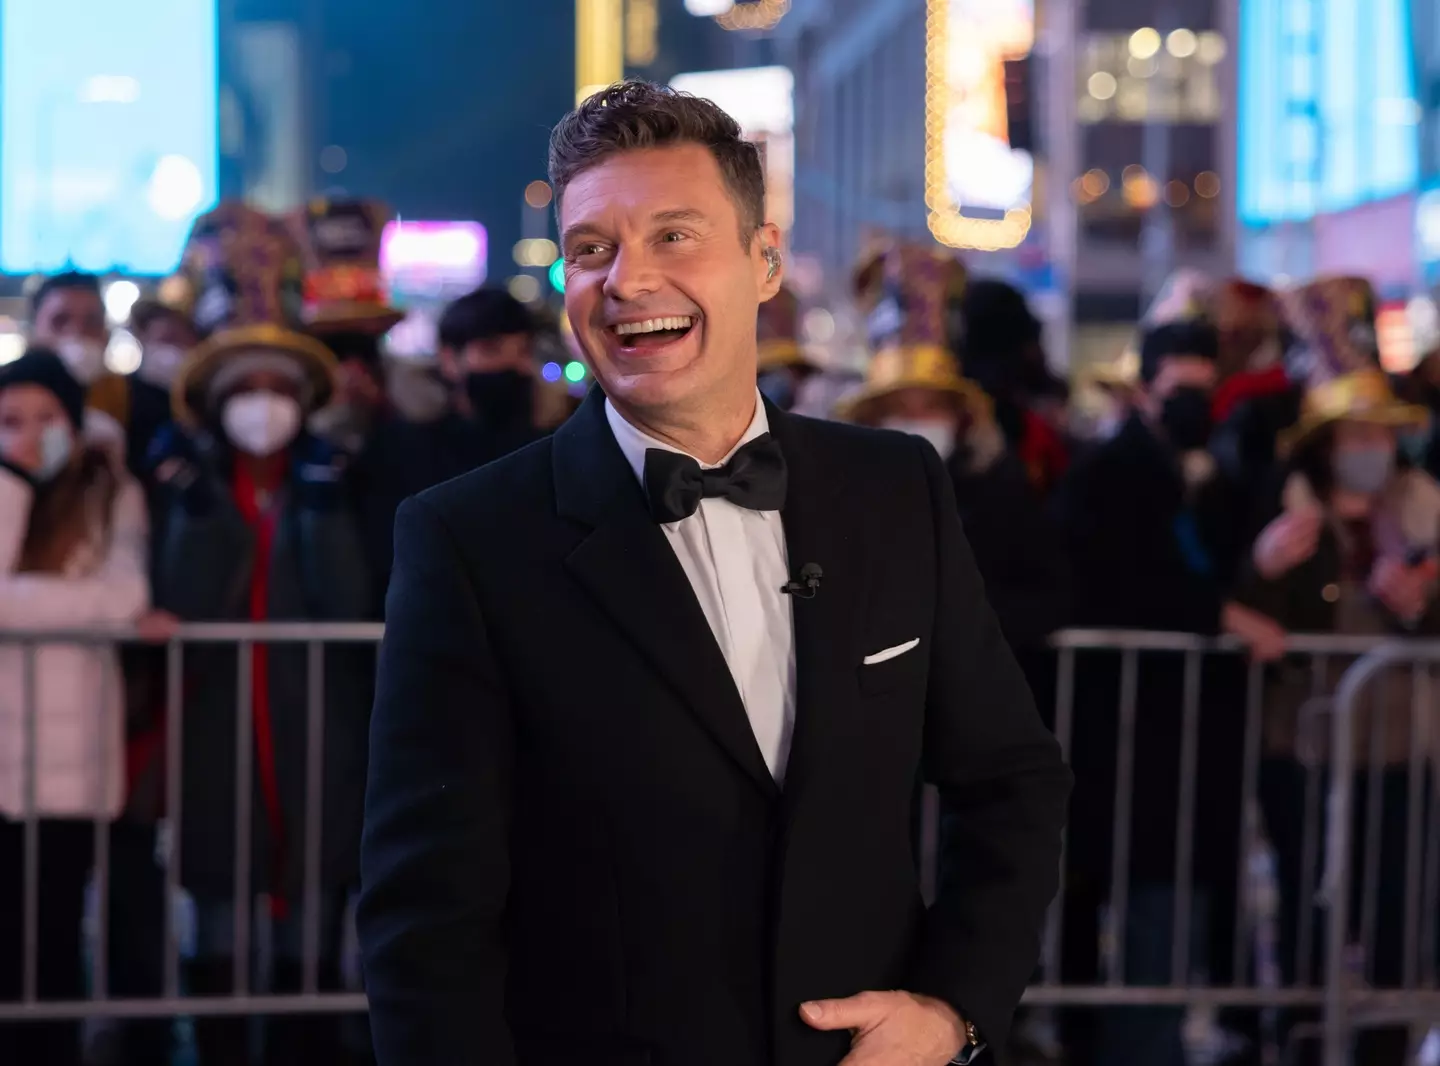 Ryan Seacrest hosted ABC's New Year's Eve Show.